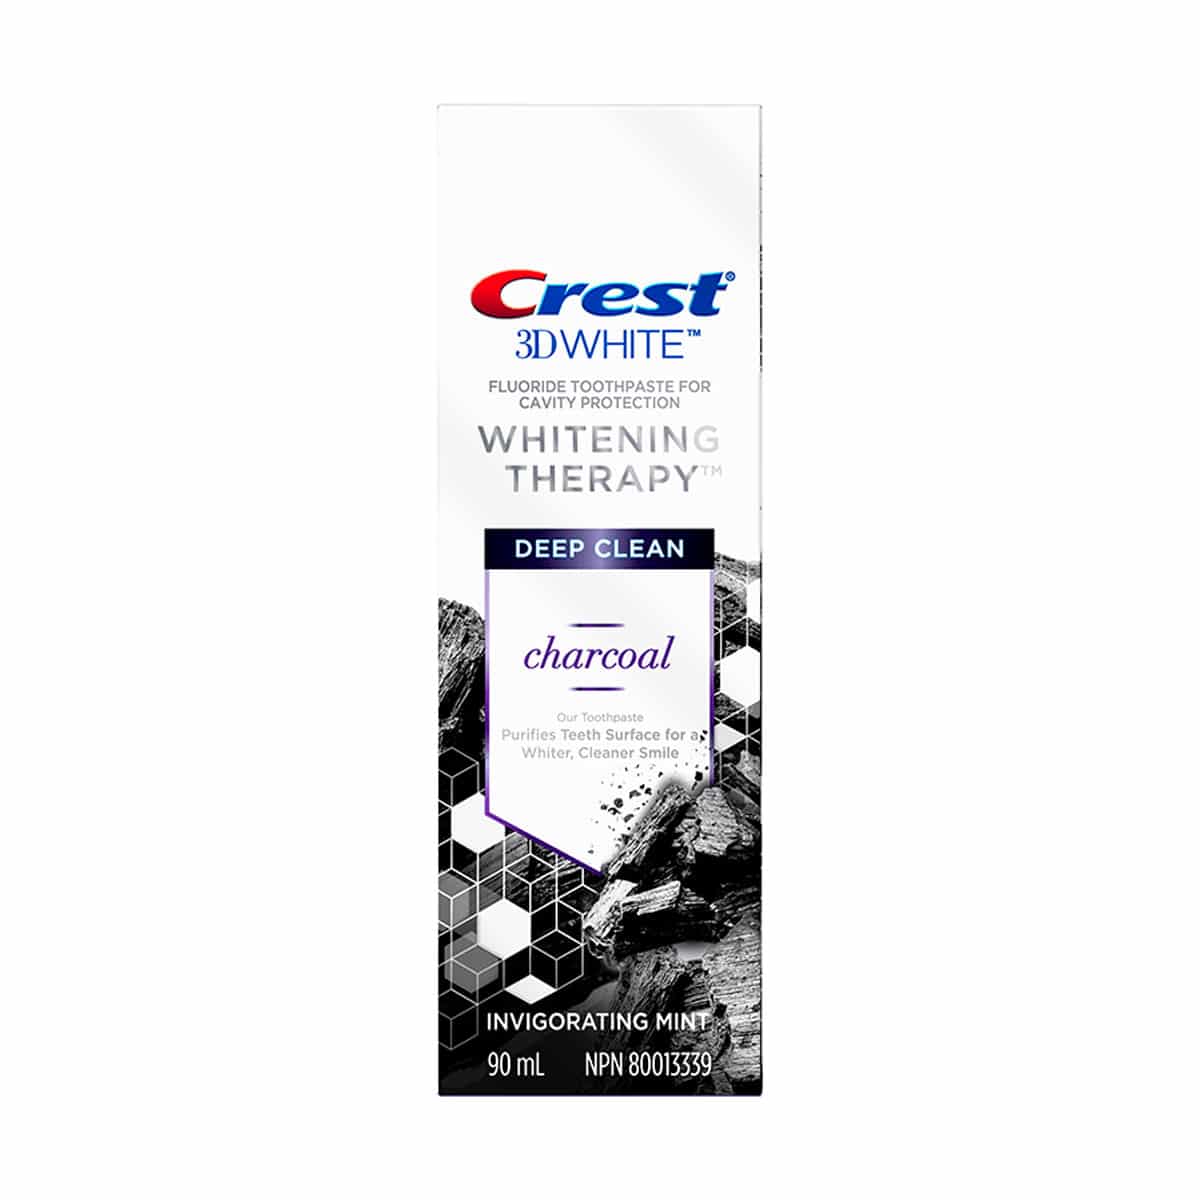 Crest 3D White Whitening Therapy Toothpaste (Charcoal)